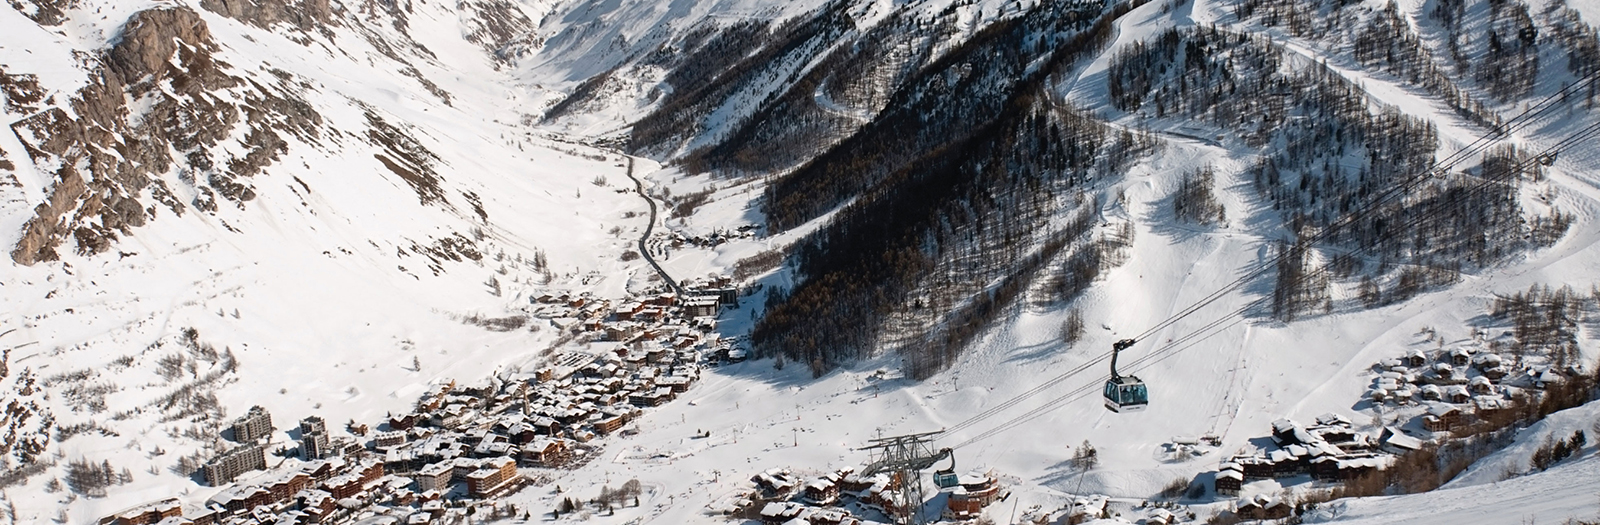 /val-d-isere-accommodations_header_alt